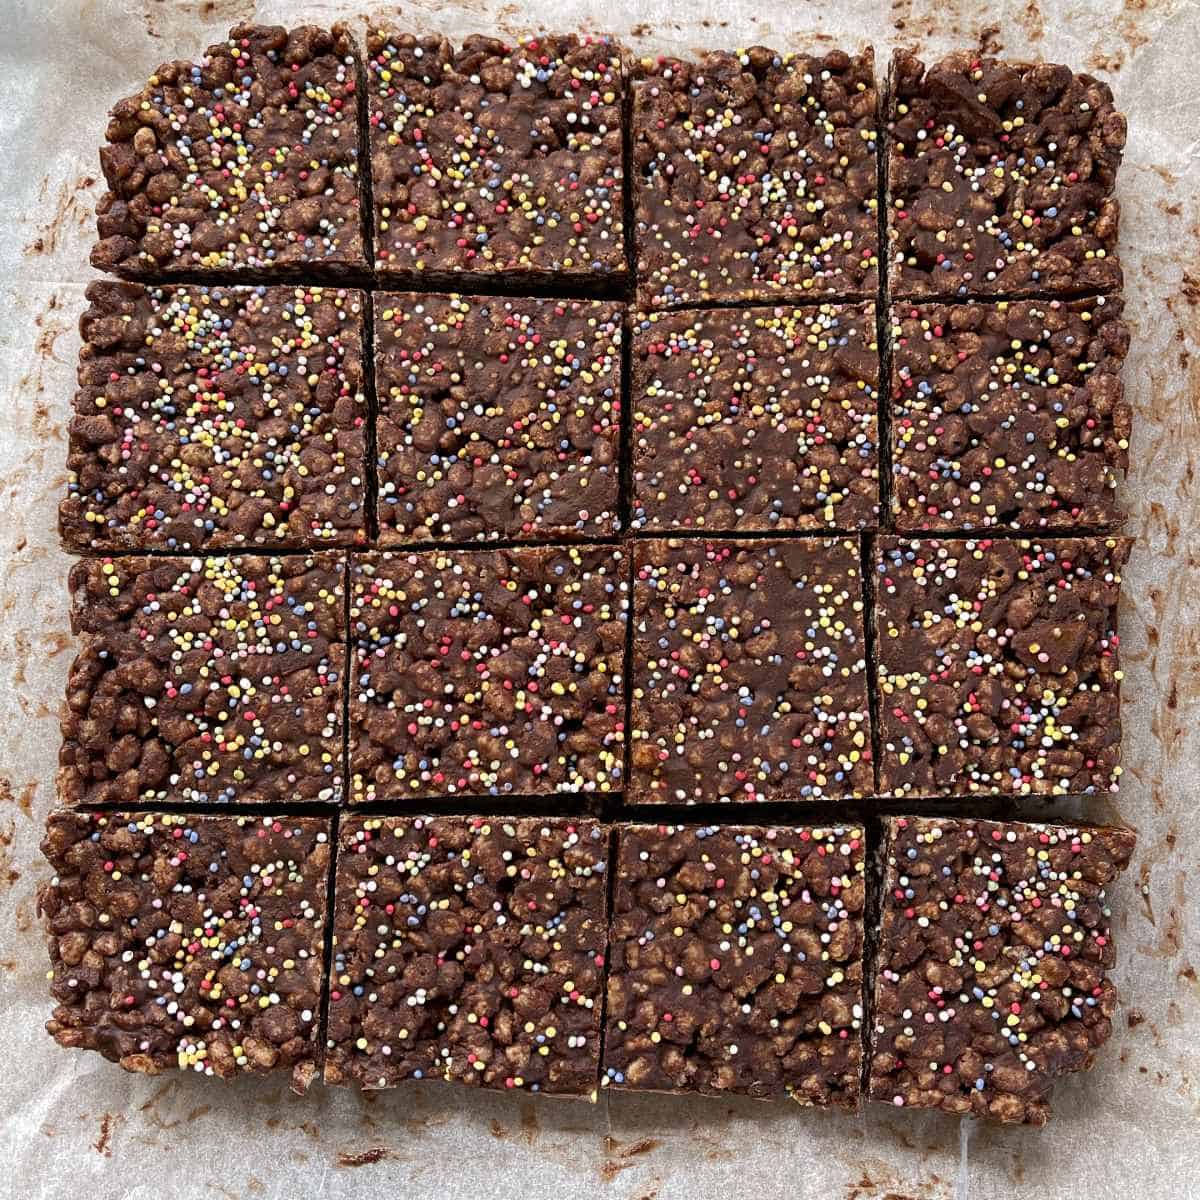 Chocolate rice bubble slice with sprinkles cut into 16 pieces on top of baking paper